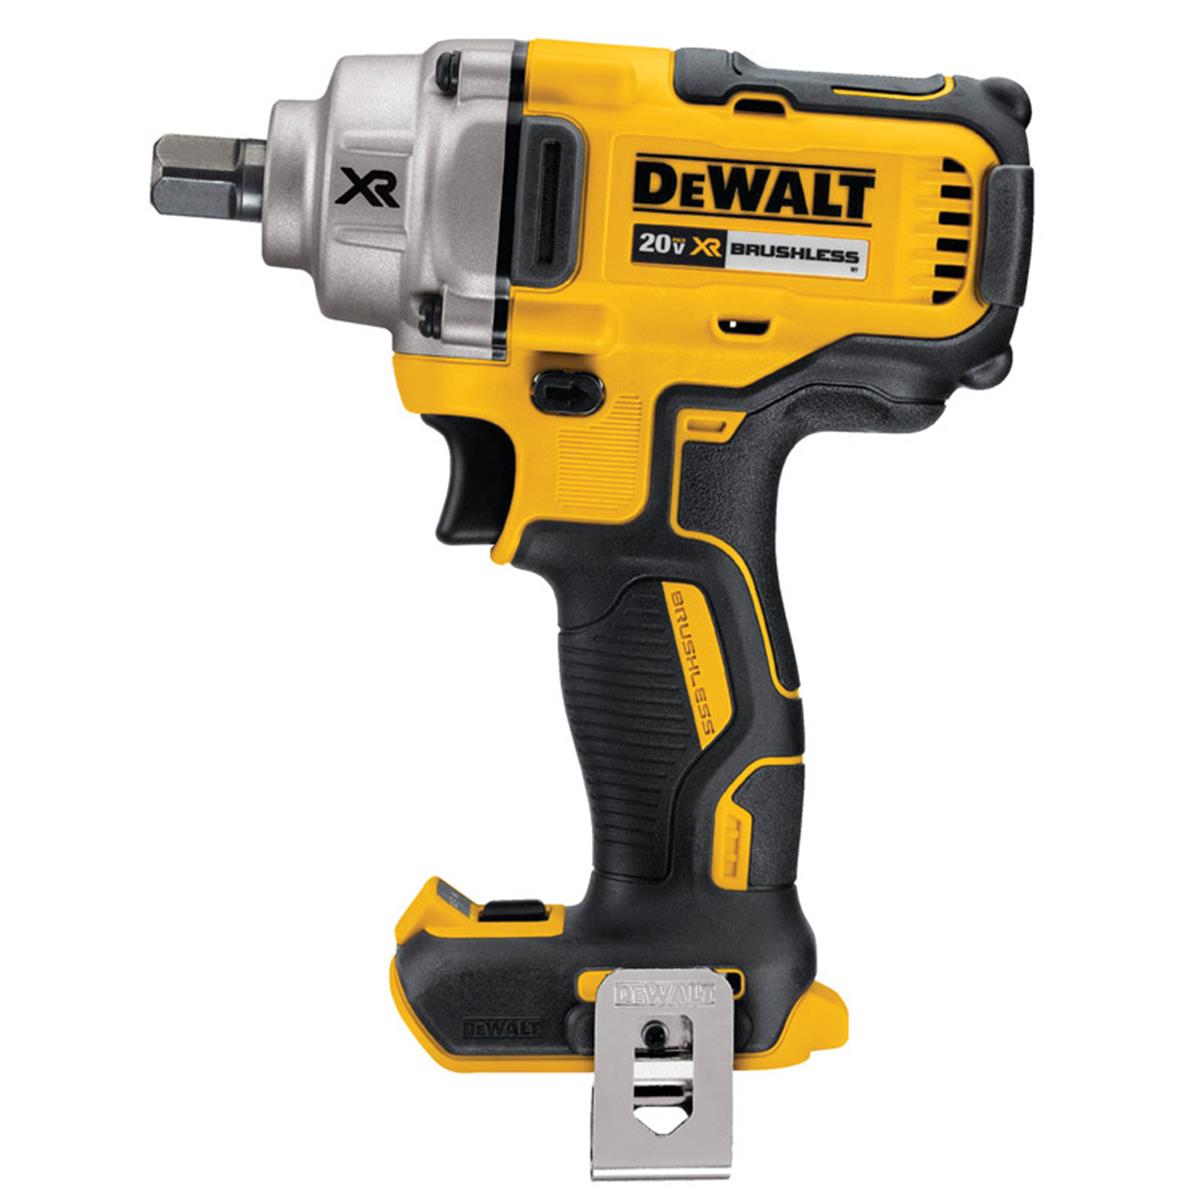 2824167 Xr 0.5 In. Drive Square Cordless Brushless Impact Wrench, 20 V - 3100 Ipm - 330 Lbs - Yellow